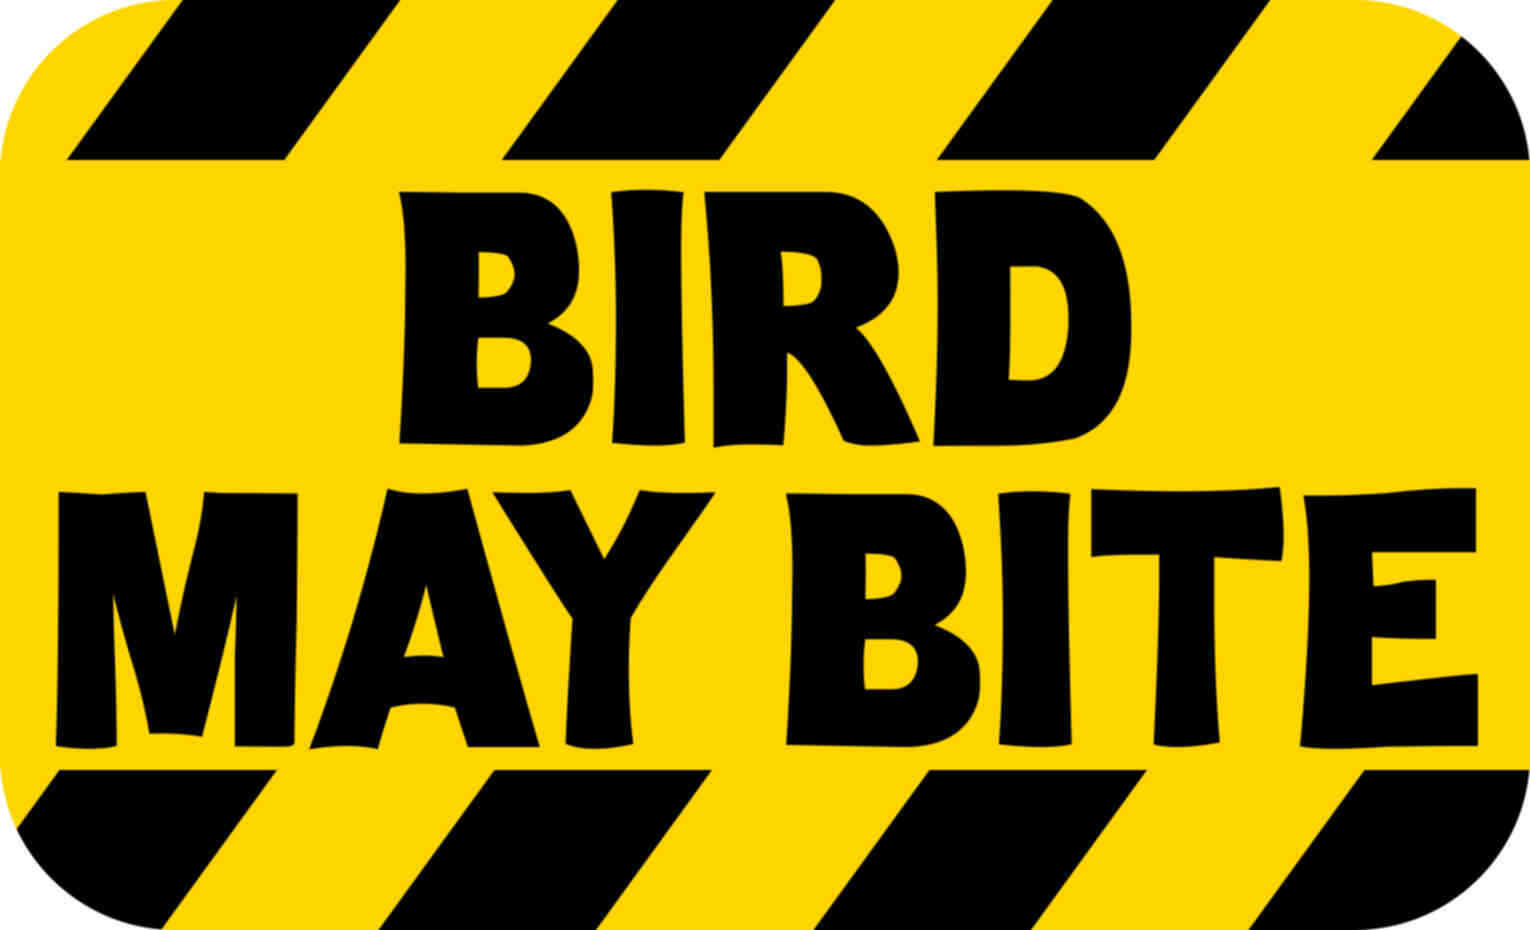 5in×3in Yellow and Black Striped Bird May Bite Sticker Vinyl Sign Stickers Decal